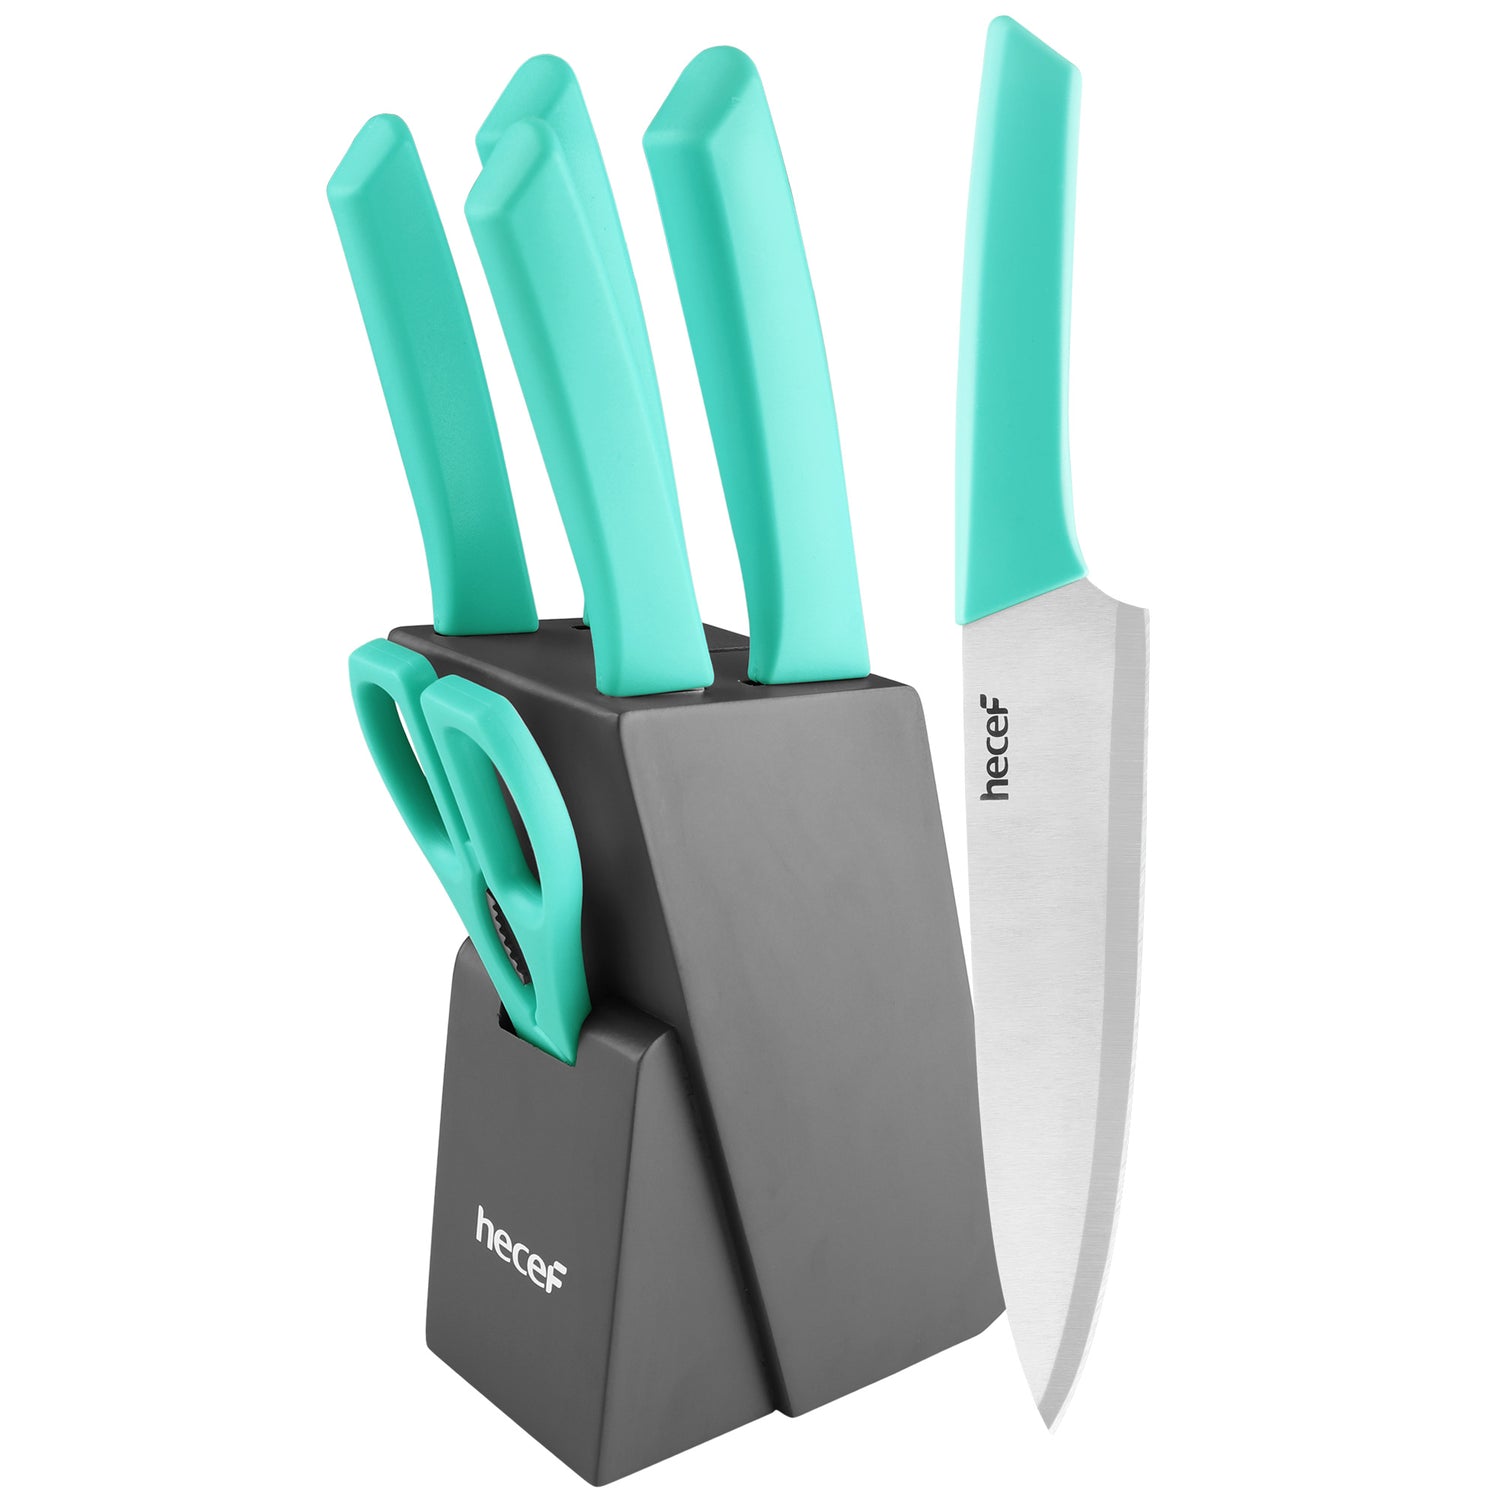 Hecef Kitchen Knife Block Set, 14 Pieces Knife Set with Wooden Block 